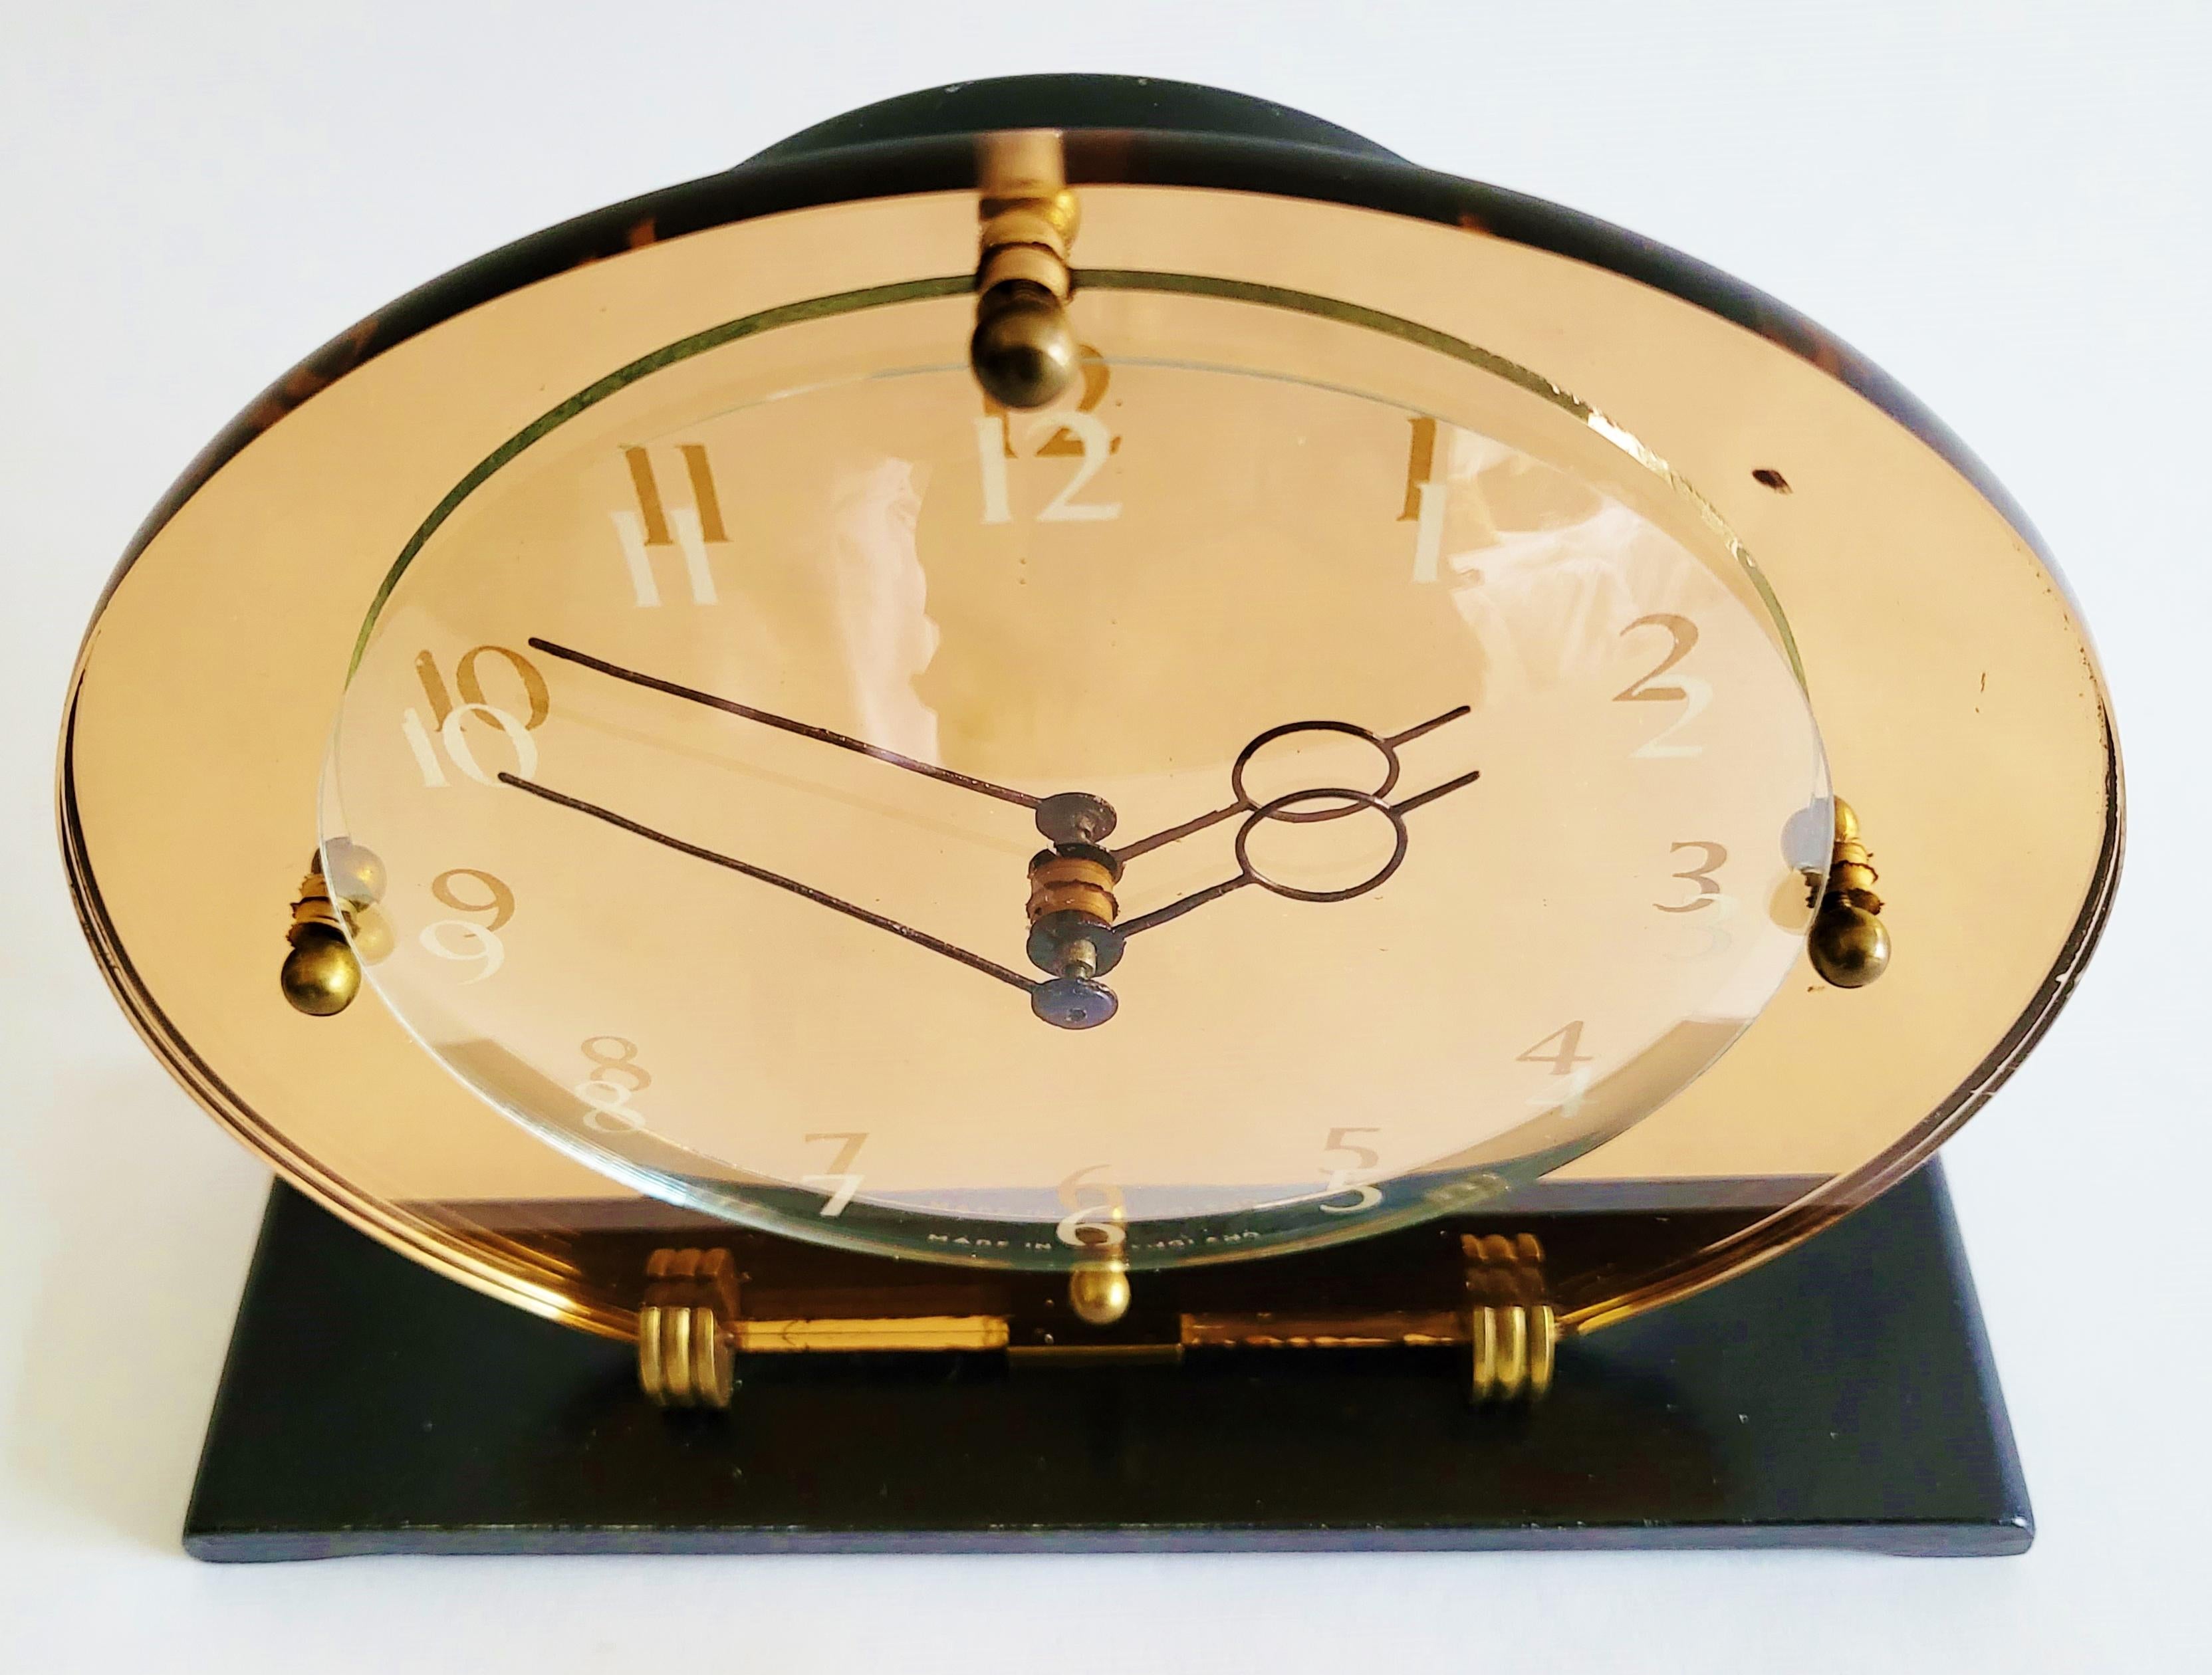 This stylish English Art Deco mechanical clock features an offset peach mirror backplate supported by two ridged brass disc feet that are mounted together with a central brass support to a black lacquered oblong base with chamfered ends. The white